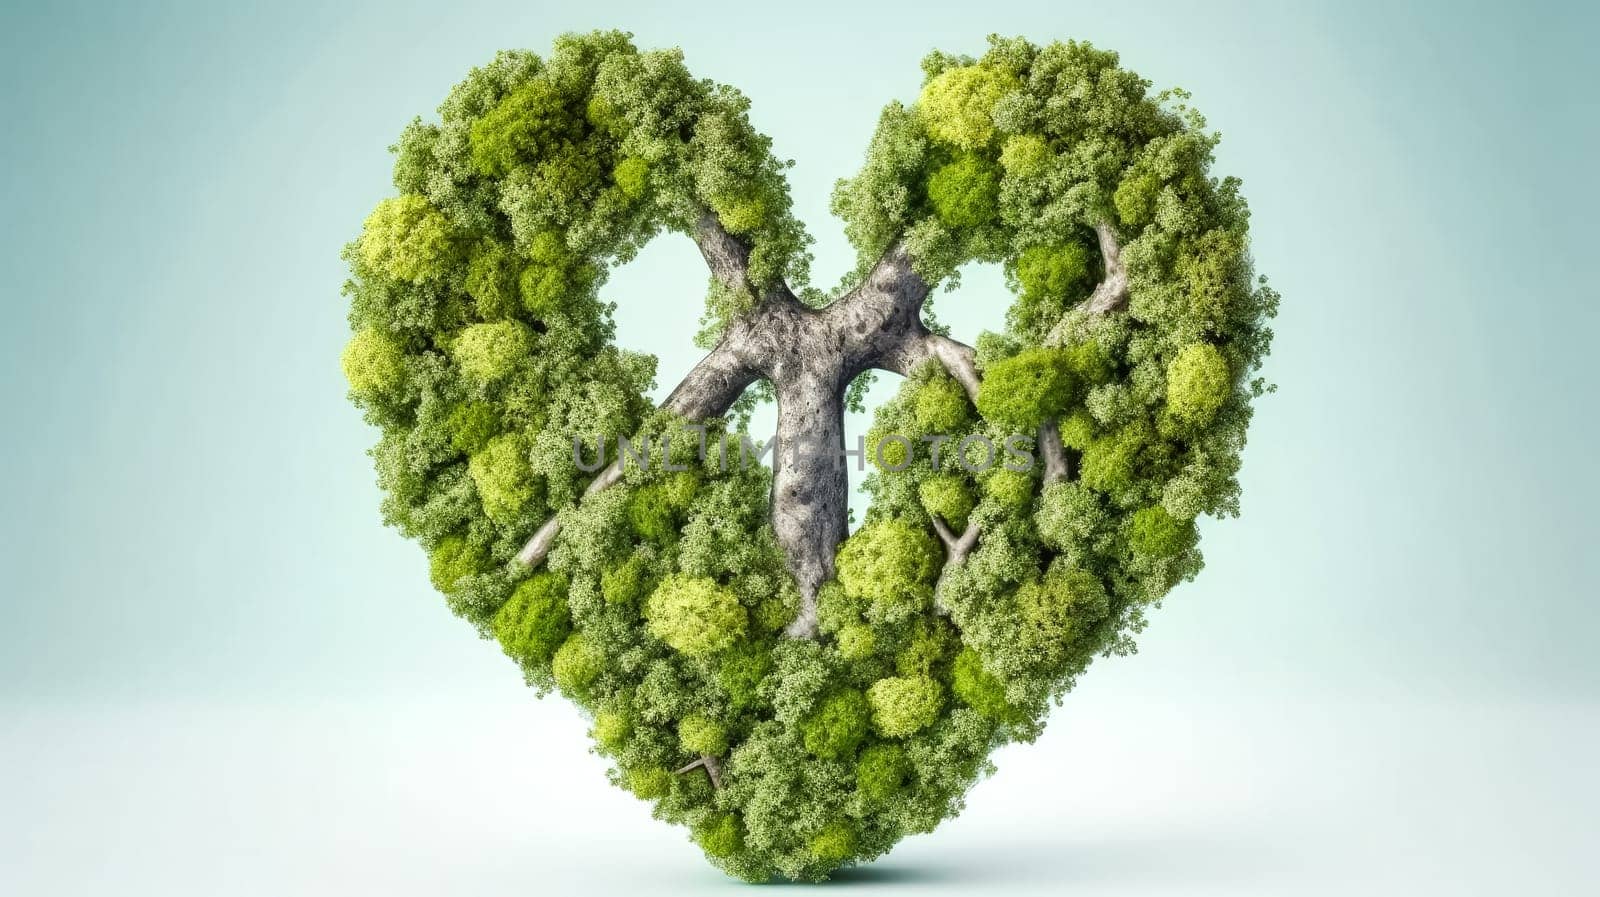 Heartbeat of the planet, A tree form heart, blending the essence of life with natures preservation an inspiring illustration of the interconnectedness of all life